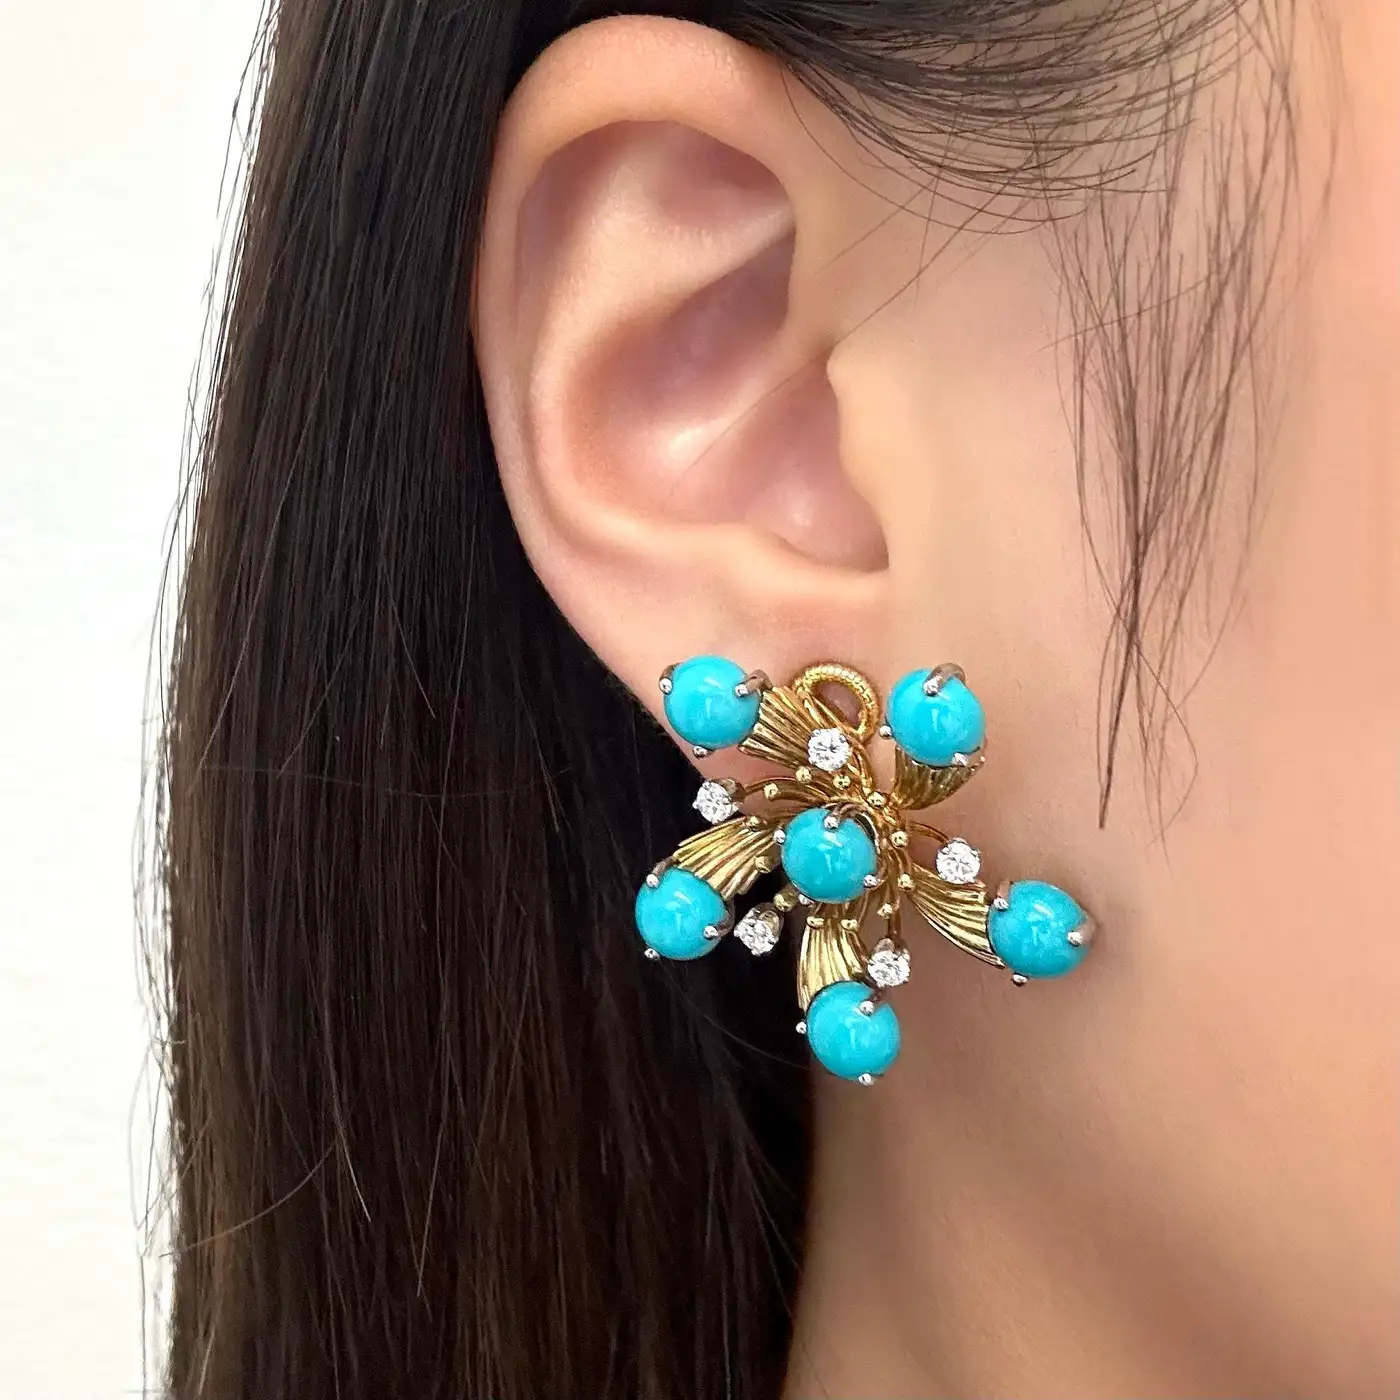 Snowflake-Turquoise-and-Diamond-Ear-Clips-Jean-Schlumberger-for-Tiffany-Co-2.webp